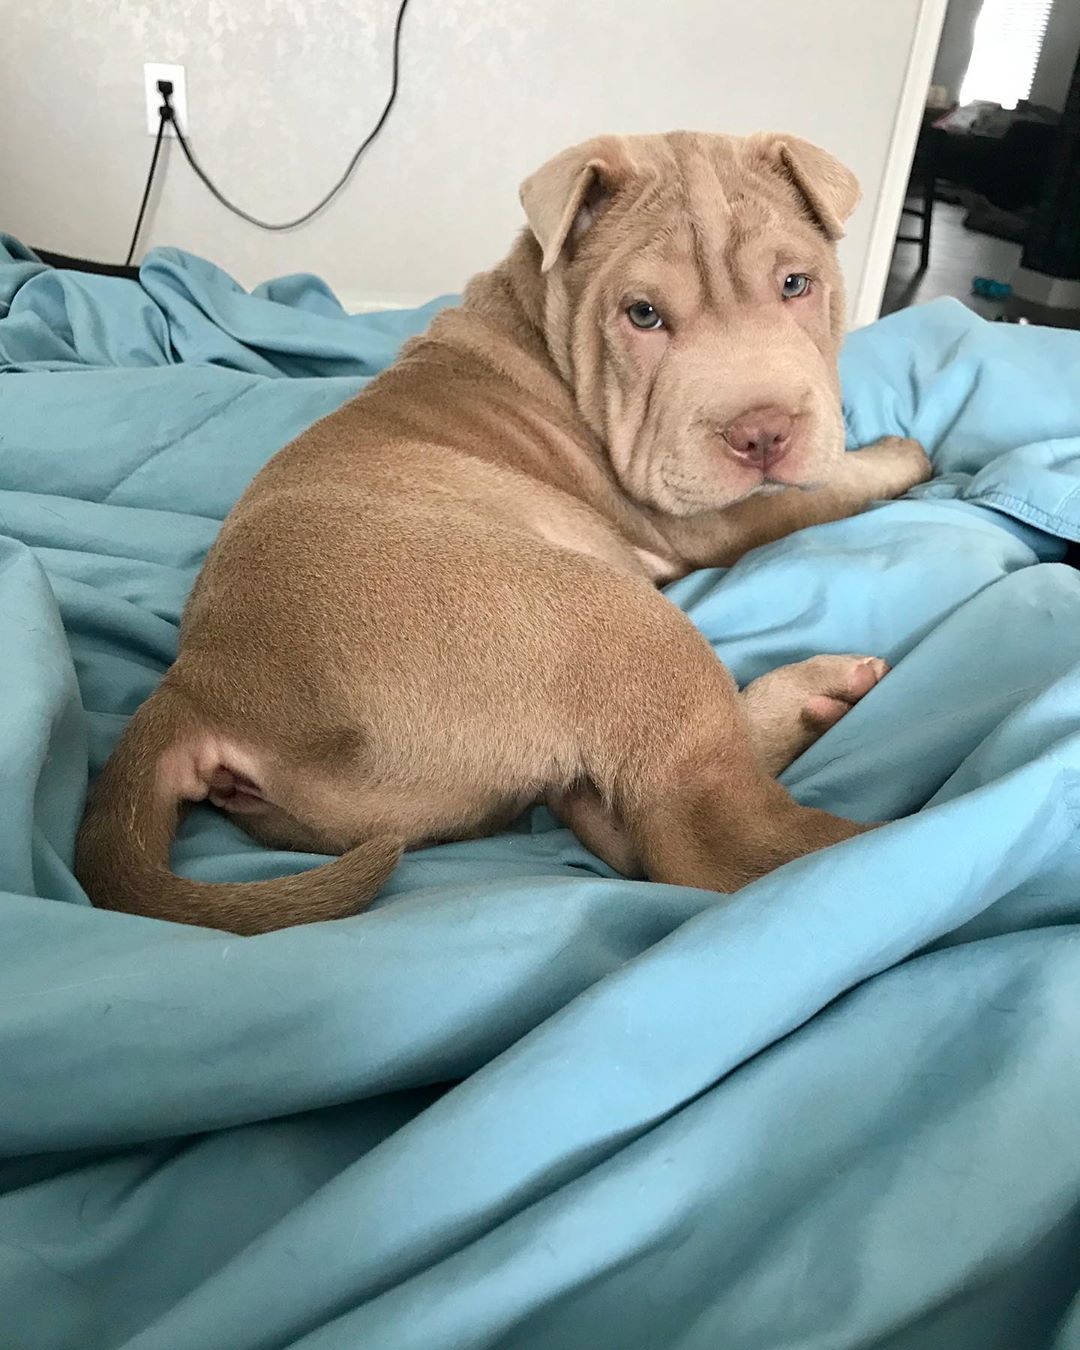 Shar-Pei lying on the bed while looking back with its adorable face